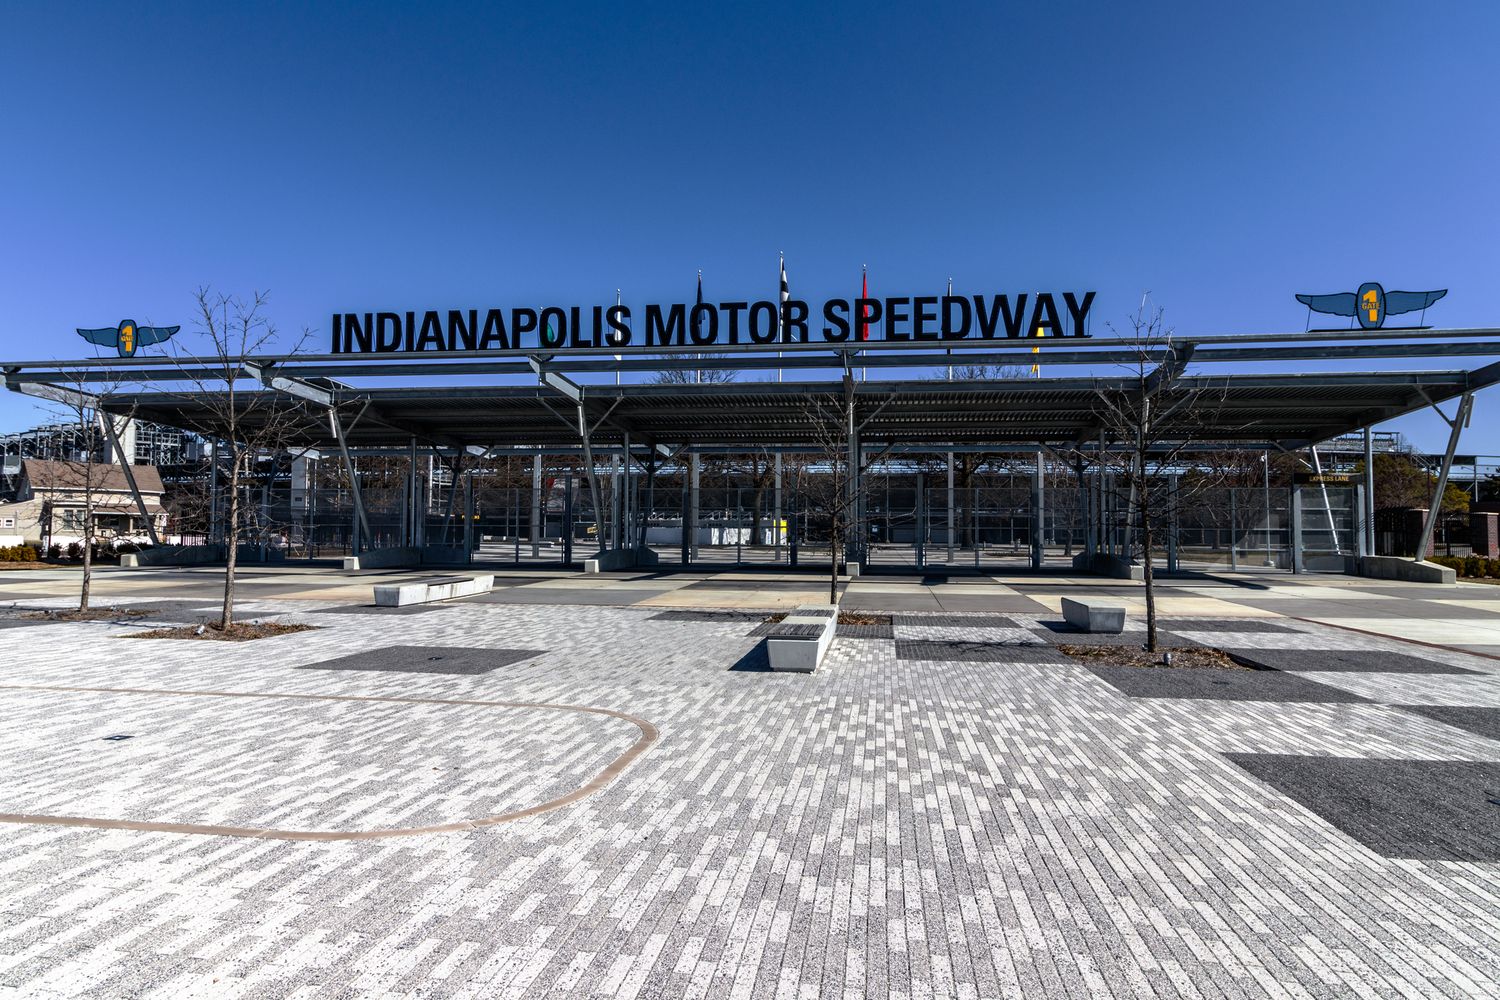 What To Do Within Walking Distance Of The Indianapolis Motor Speedway